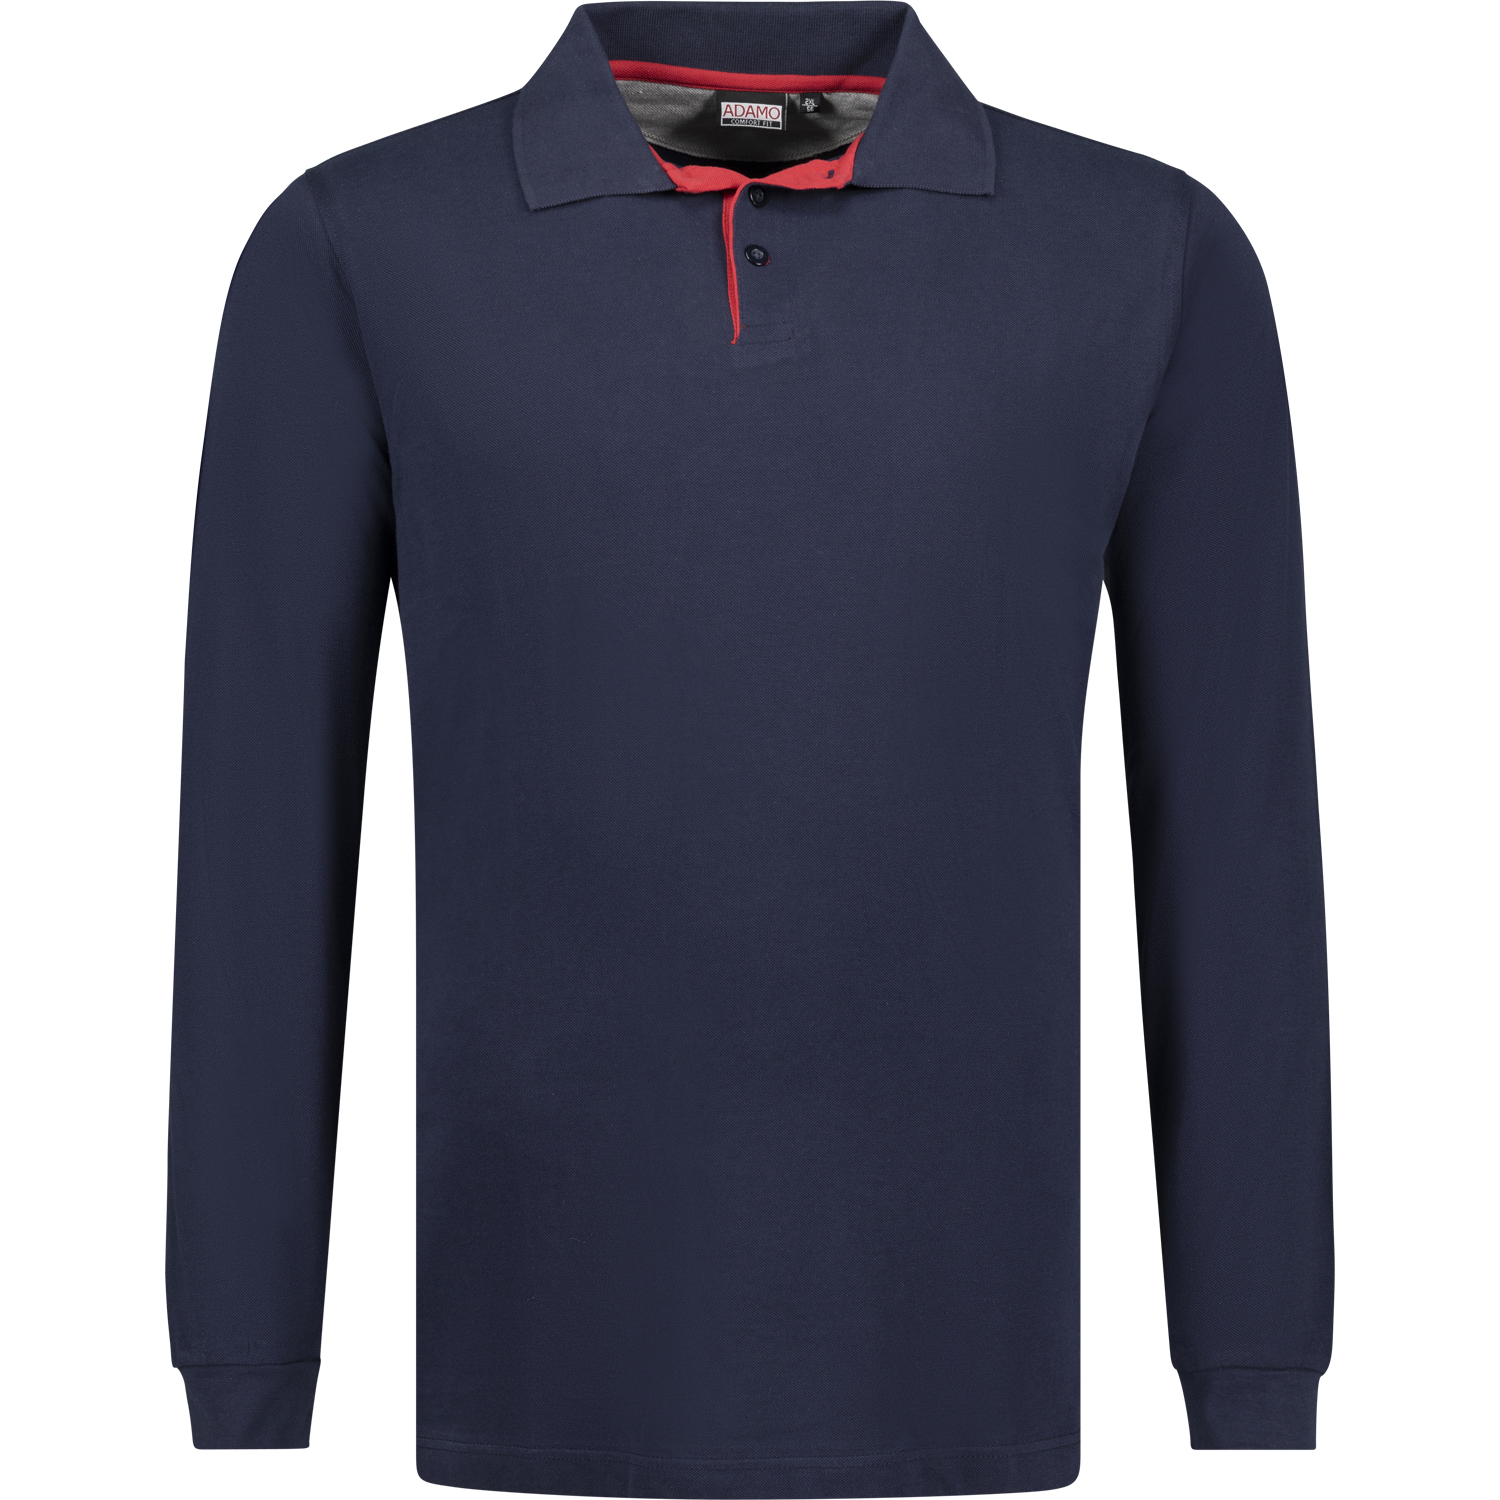 Long sleeve polo shirt COMFORT FIT in navy blue serie Peter by Adamo up to oversize 12XL